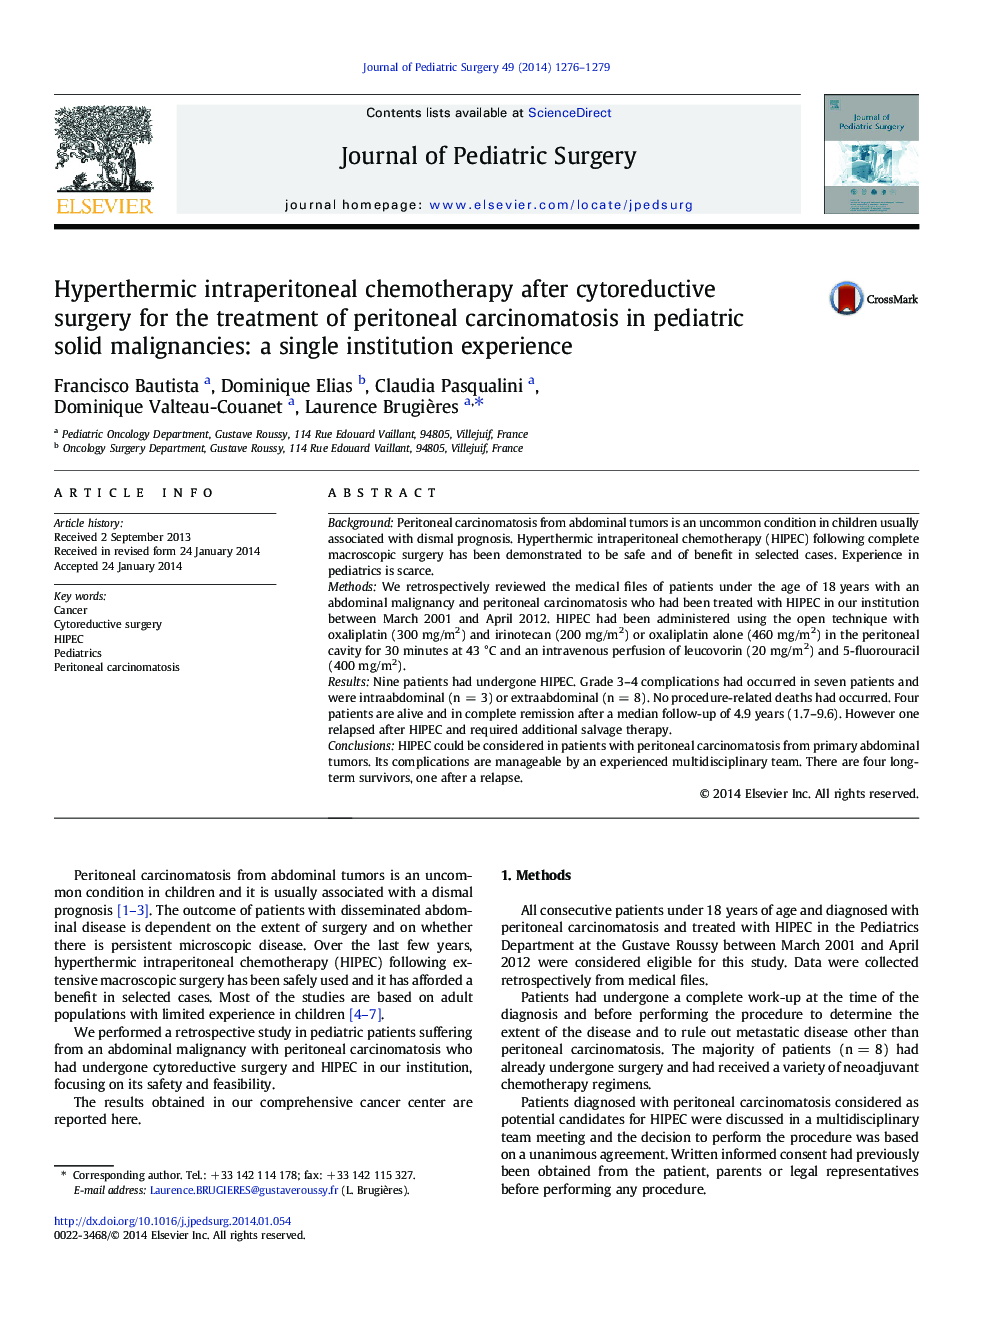 Hyperthermic intraperitoneal chemotherapy after cytoreductive surgery for the treatment of peritoneal carcinomatosis in pediatric solid malignancies: a single institution experience